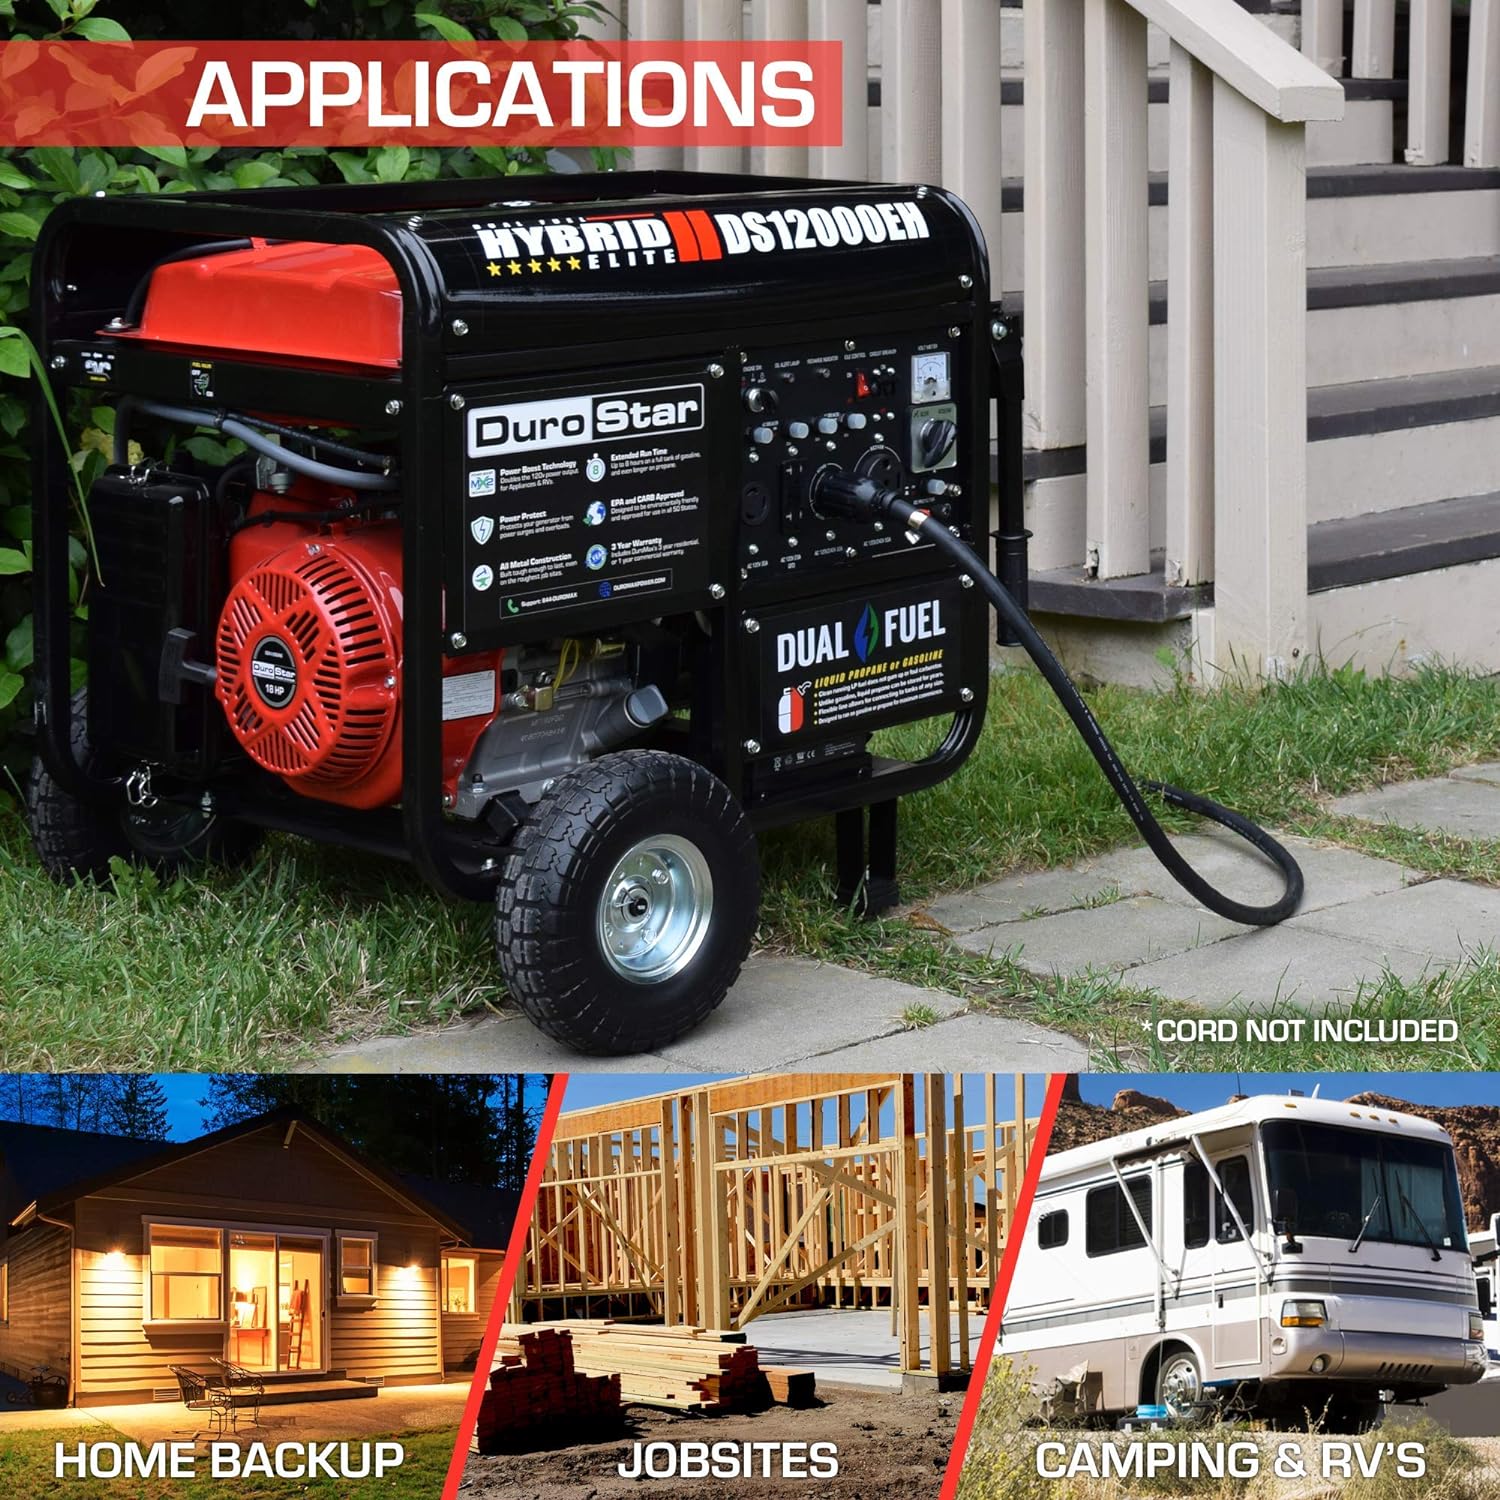 DuroStar DS4850EH Dual Fuel Portable Generator-4850 Watt Gas or Propane Powered Electric Start-Camping  RV Ready, 50 State Approved, Red/Black - DuroStar DS4850EH Dual Fuel Portable Generator-4850 Watt Gas Or Propane Powered Electric Start-Camping & RV Ready, 50 State Approved, Red/Black Review